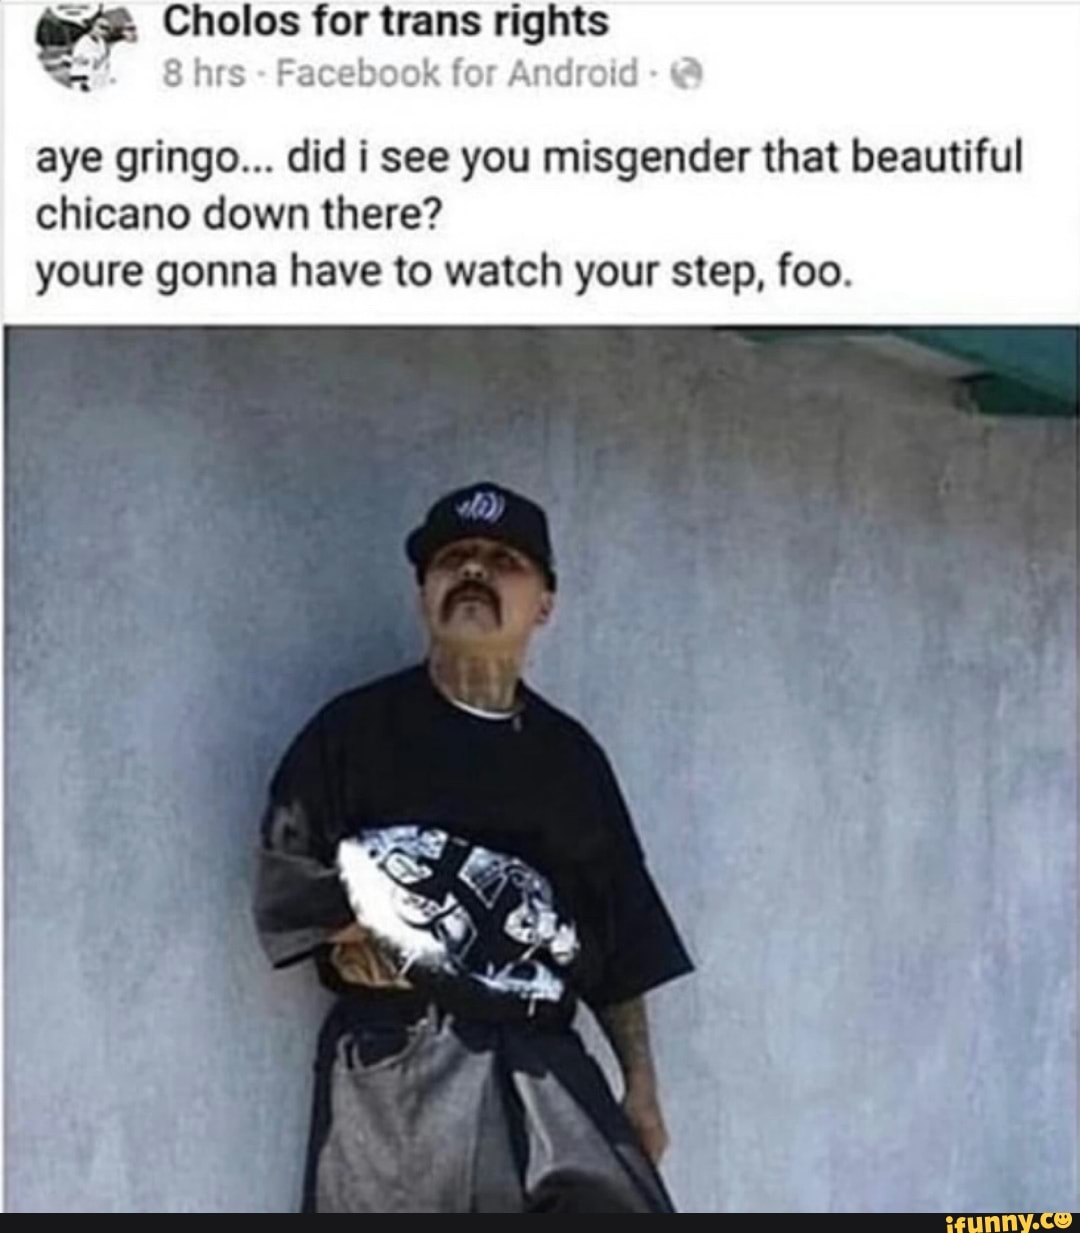 QQ, Cholos for trans rights aye gringo... did i see you misgender that ...